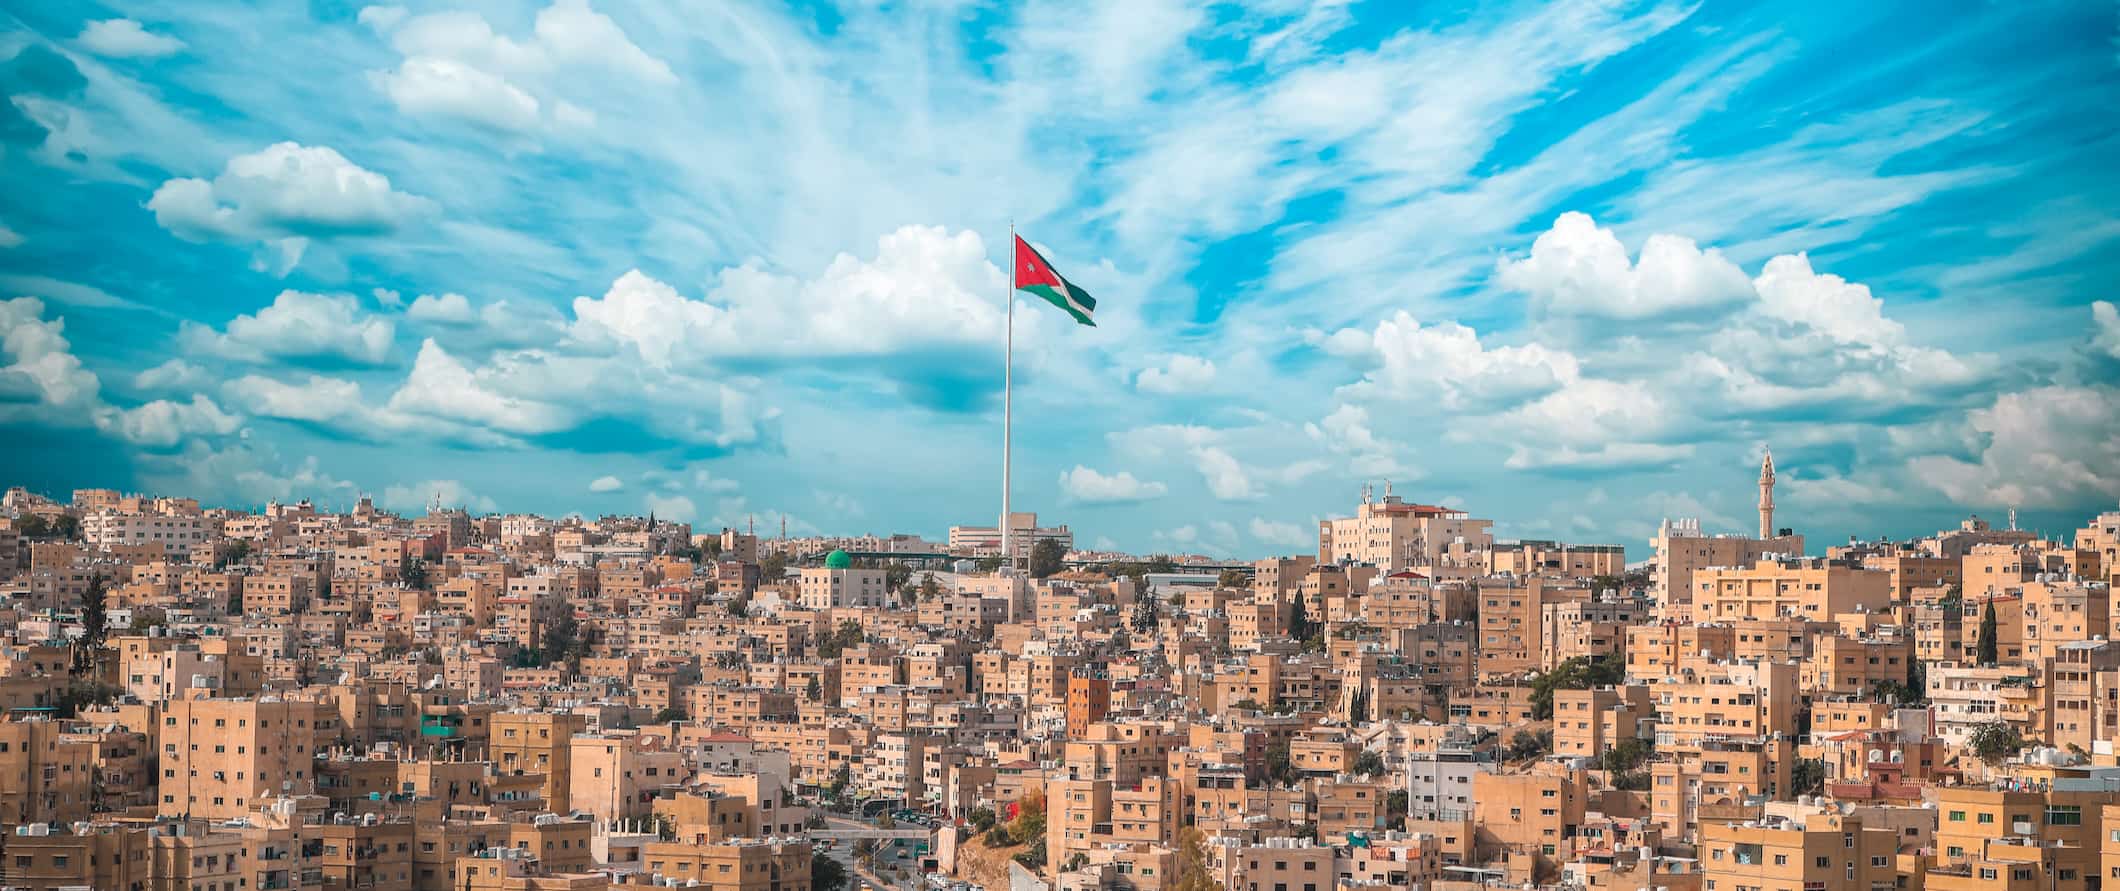 A bright blue sky over Amman, Jordan with a sky blowing in the wind